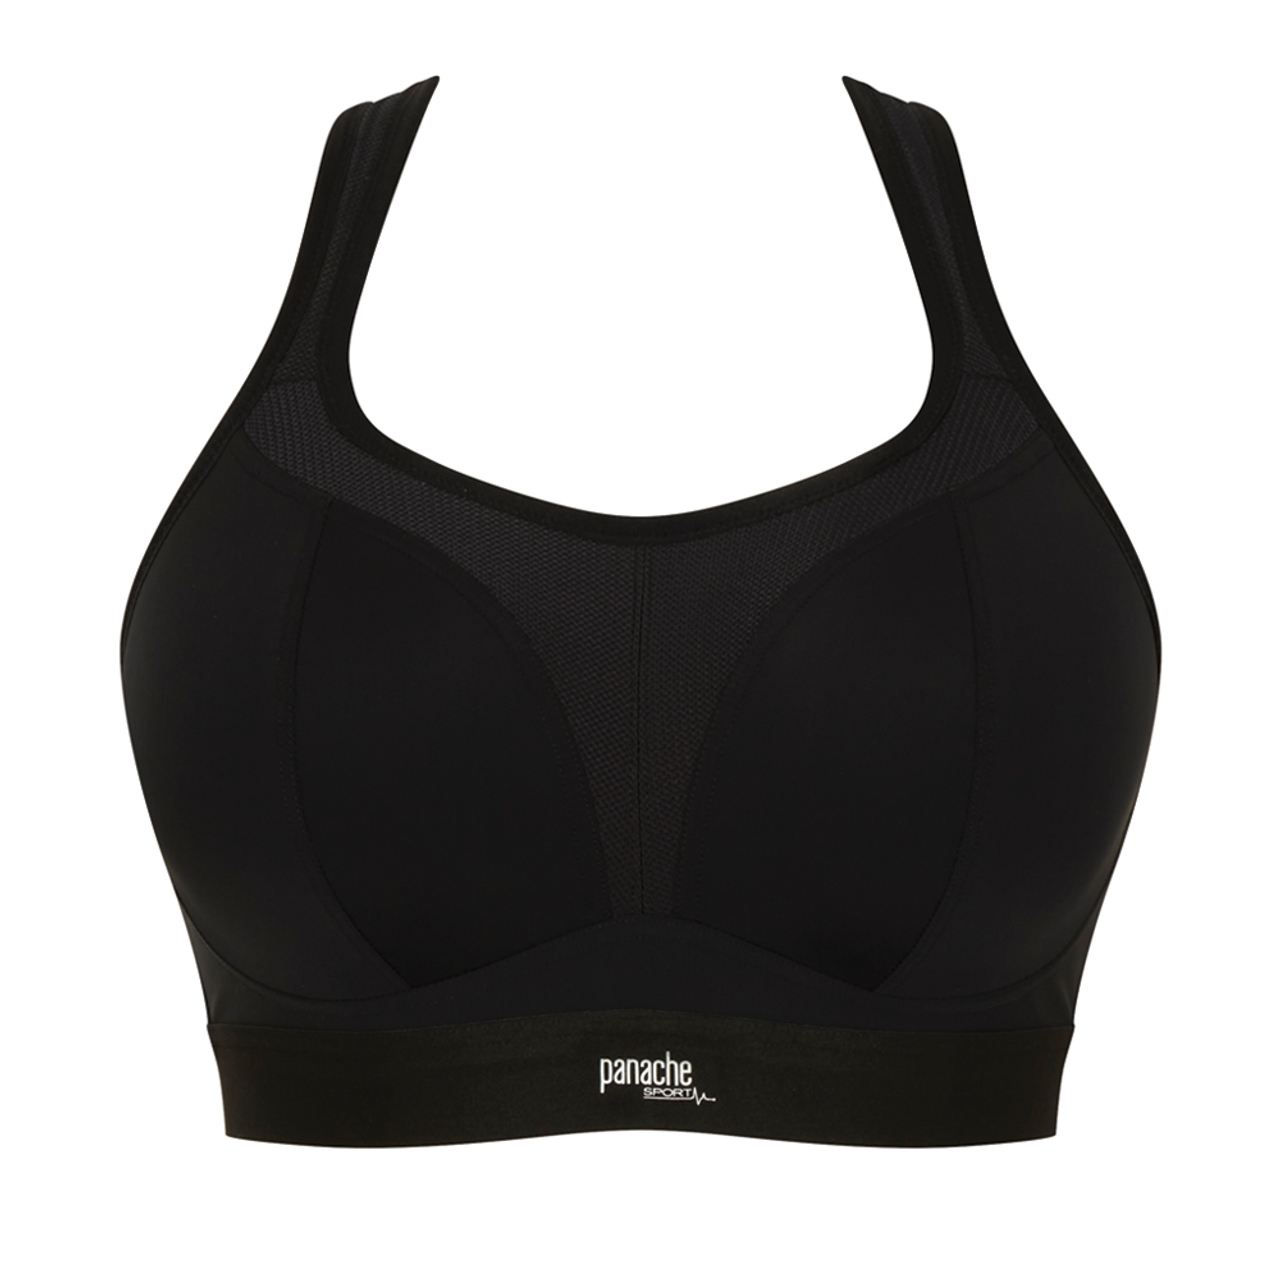 Panache Wired Sports Bra in Odyssey Print FINAL SALE NORMALLY $70 - Busted  Bra Shop